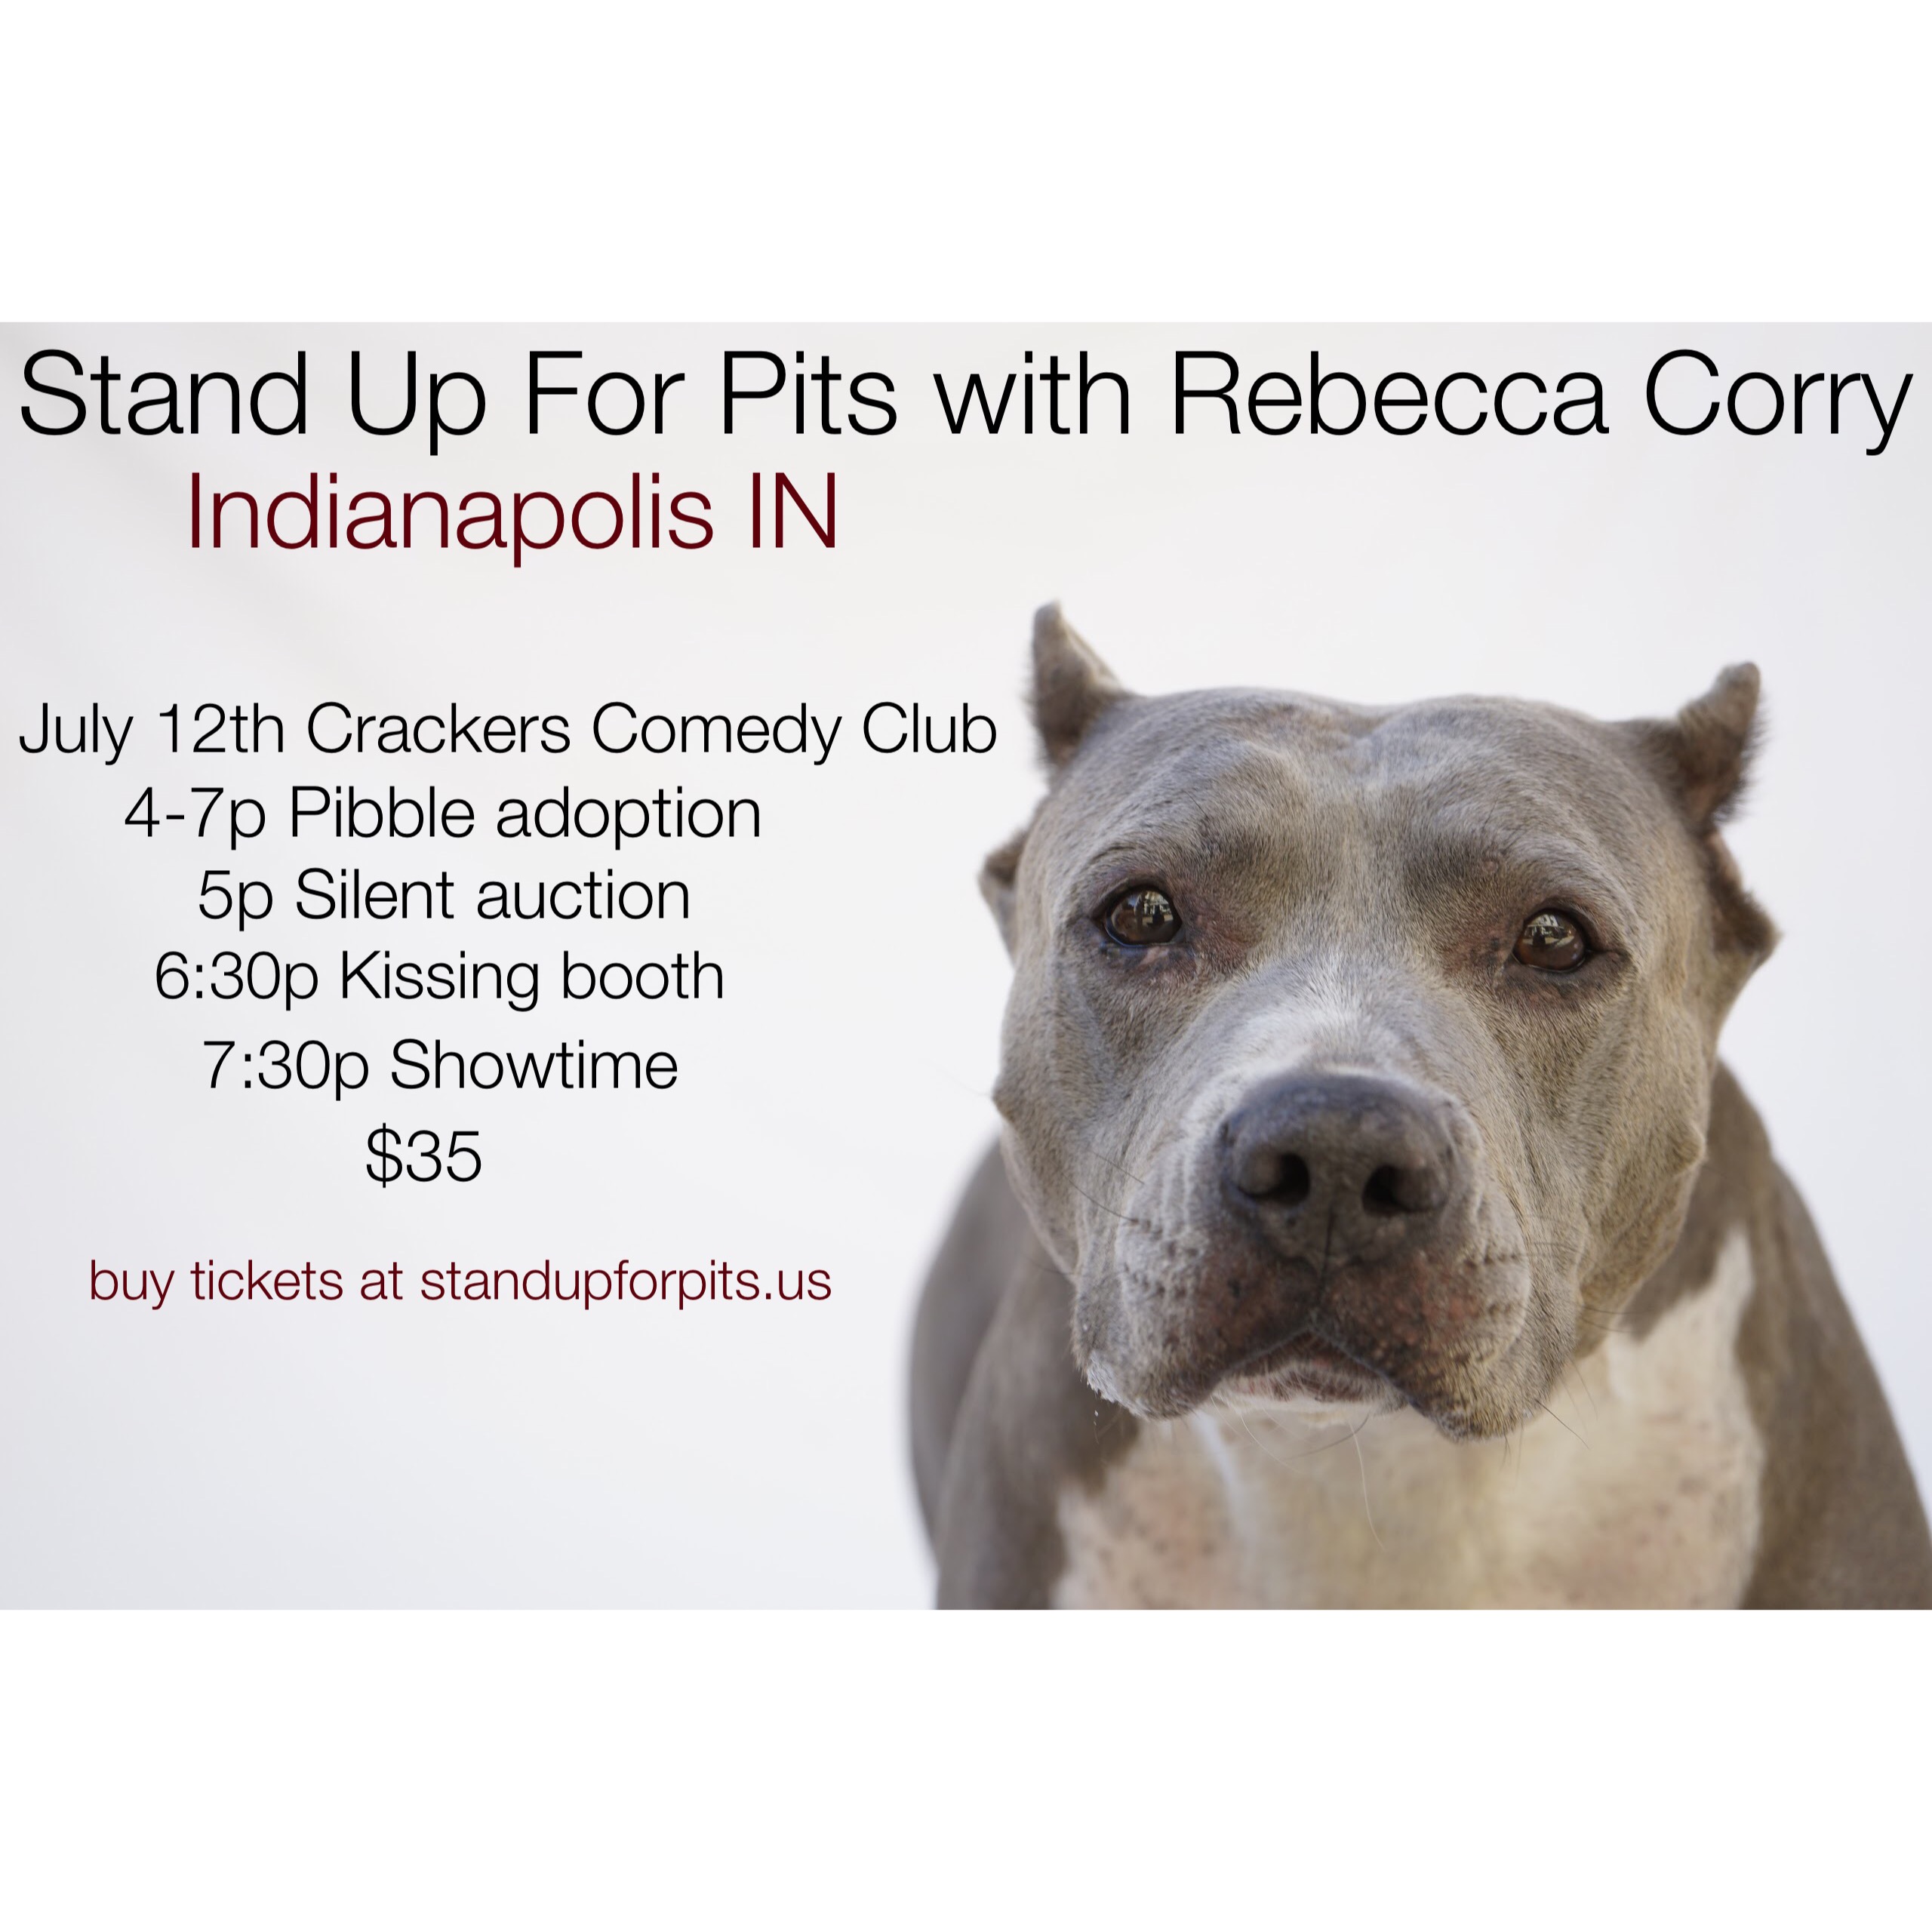 stand up for pits indianapolis tix on sale now!!